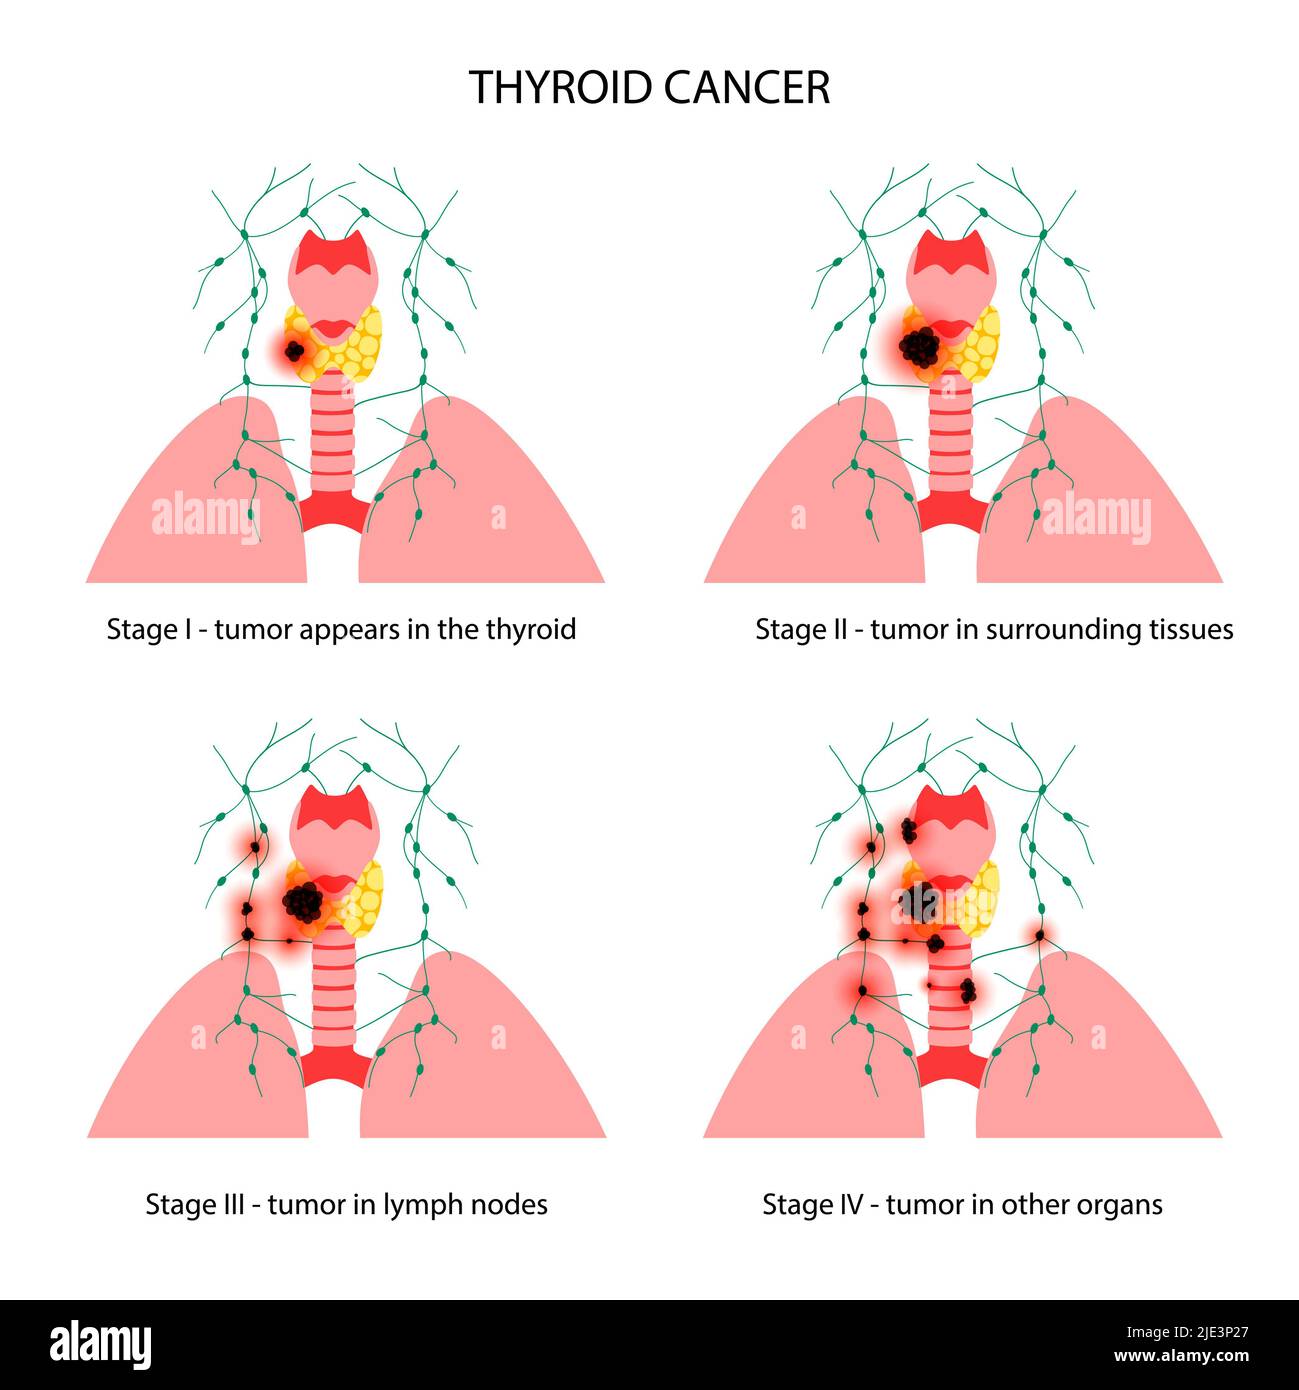 Thyroid cancer stages, illustration. Stock Photo